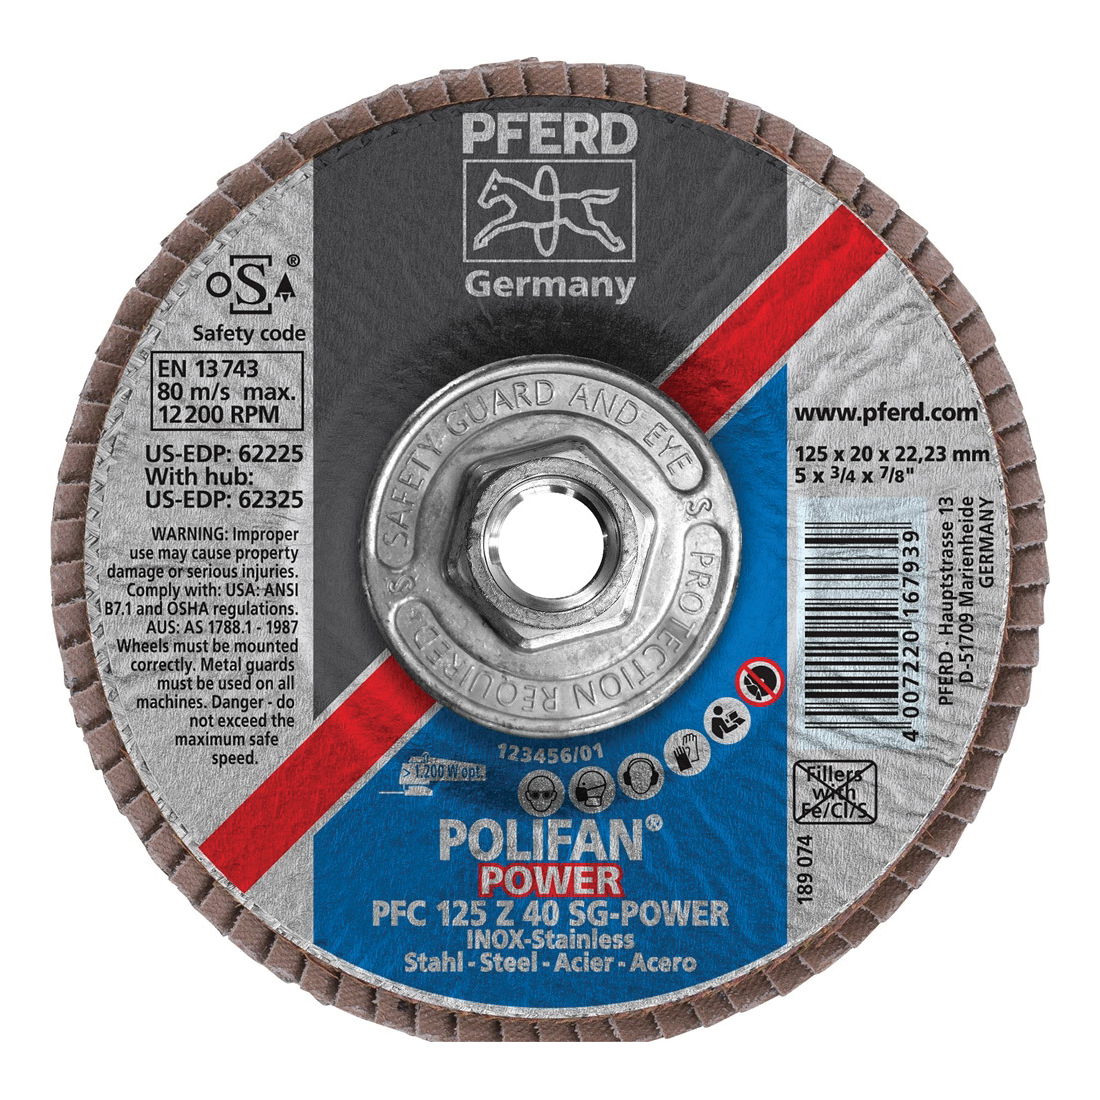 PFERD Polifan® 62325 Performance Line SG Z-Power Threaded Coated Abrasive Flap Disc, 5 in Dia, 40 Grit, Zirconia Alumina Abrasive, Type 29 Conical Disc